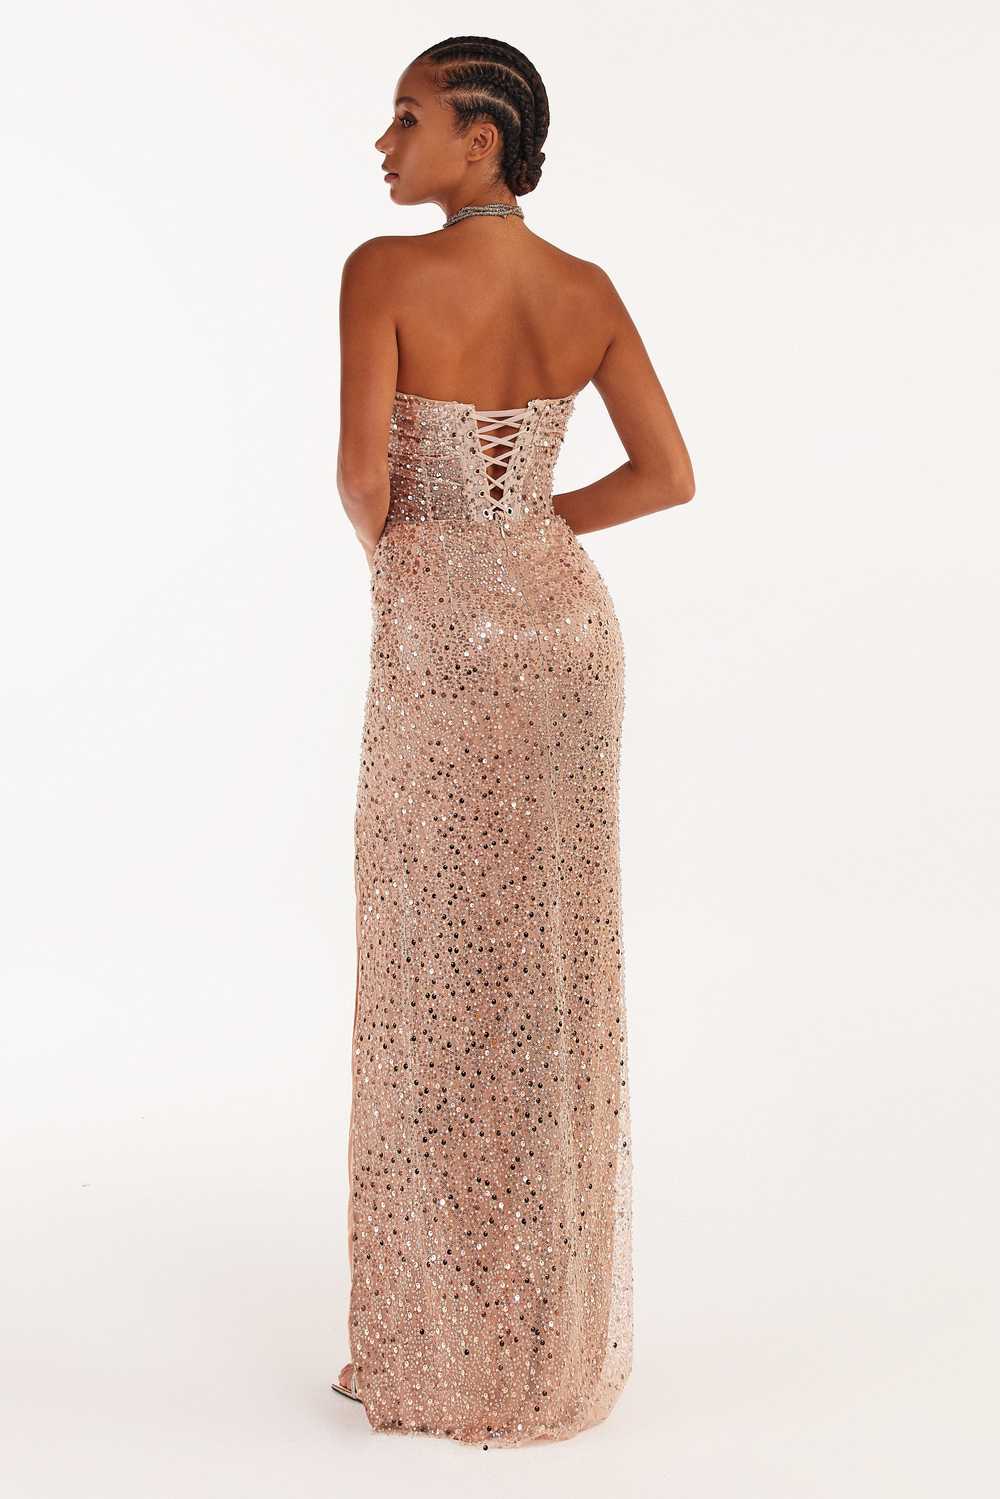 Milla Radiant maxi dress in gold - image 4